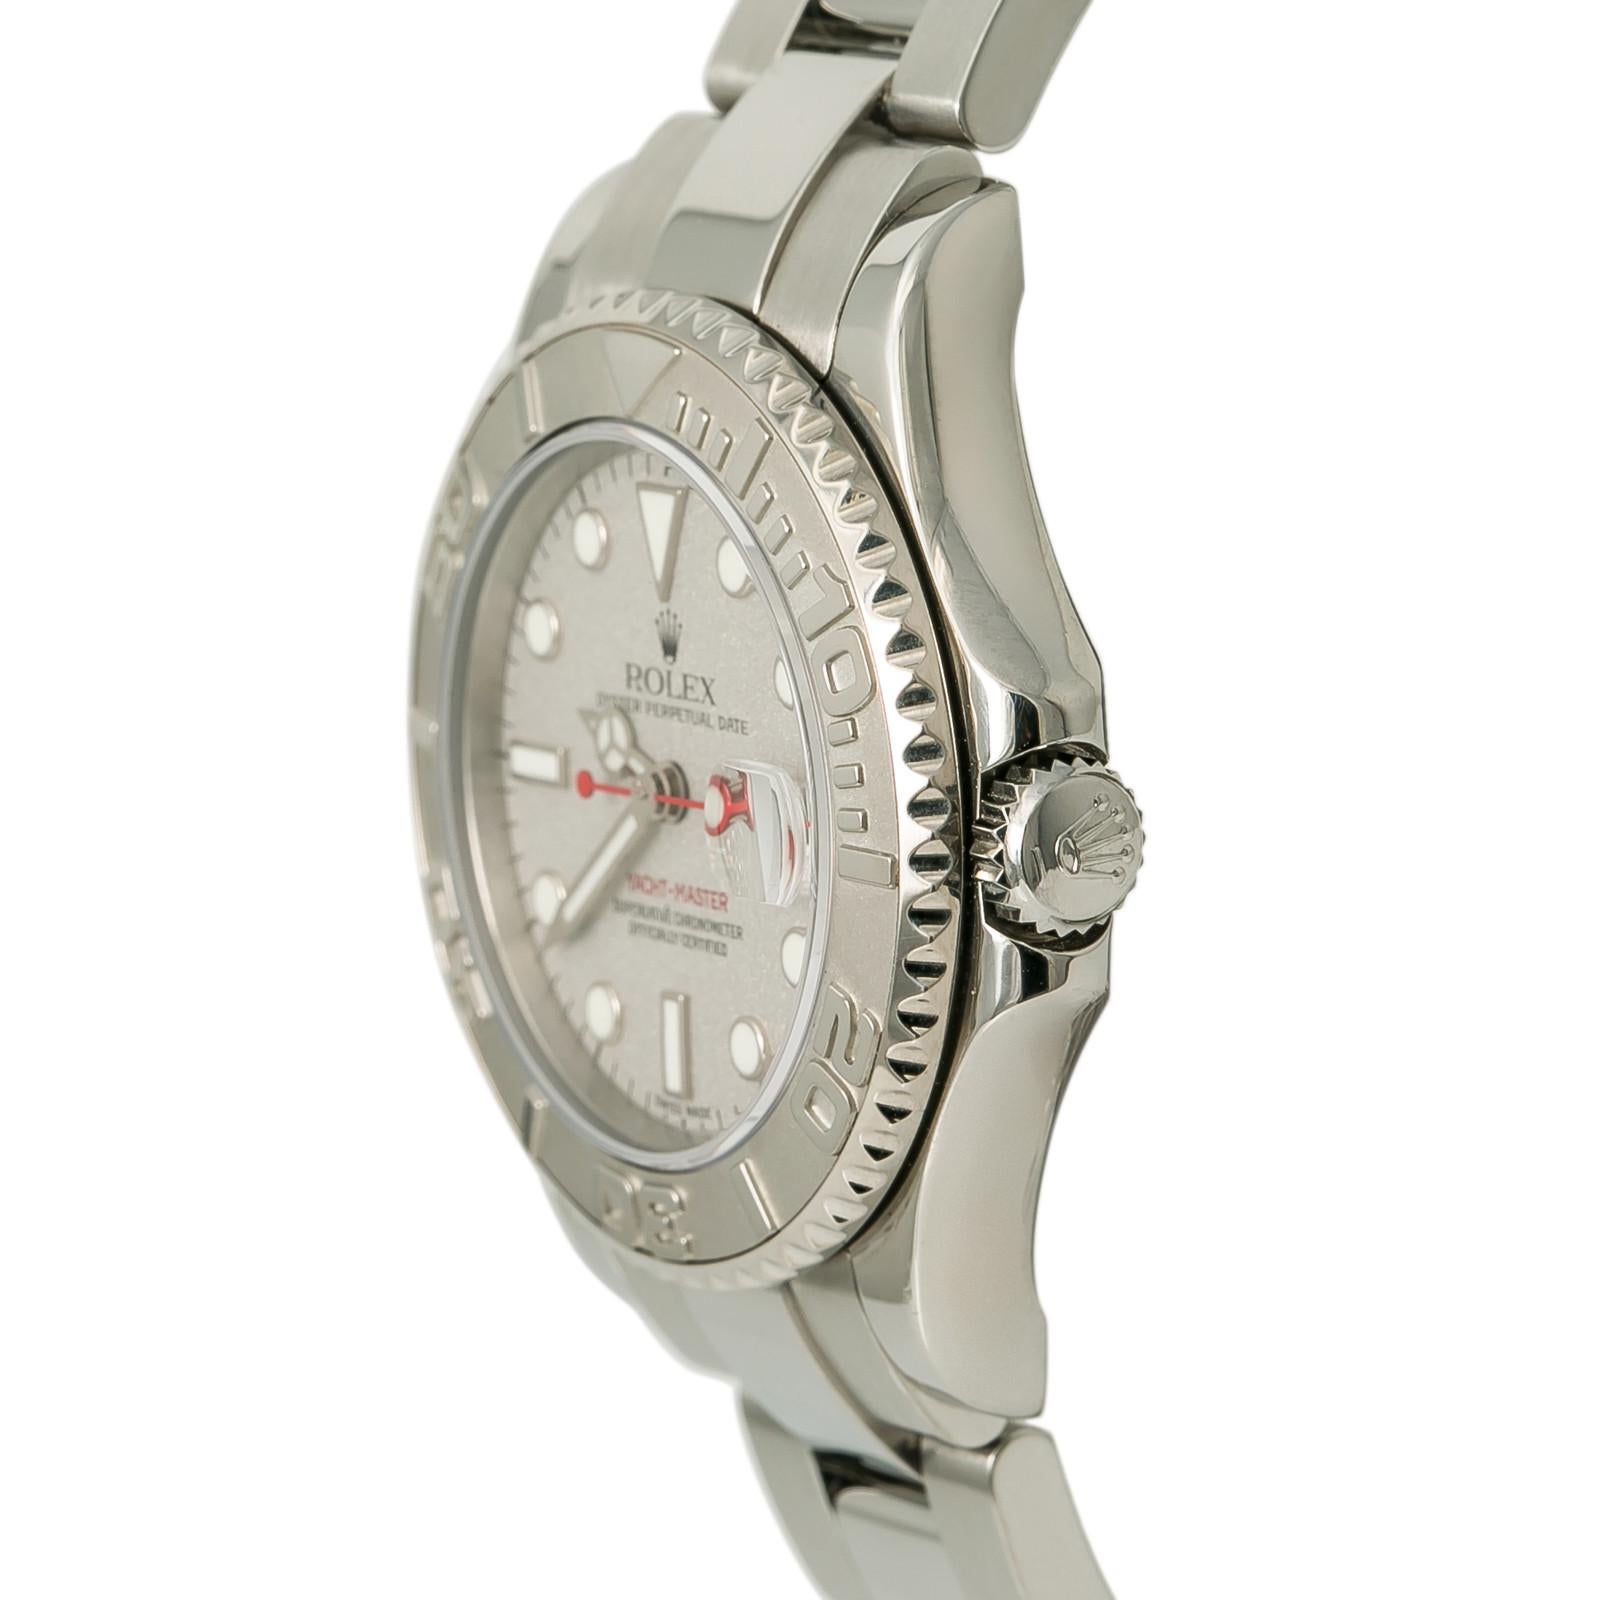 Rolex Yacht-Master 168622, White Dial, Certified and Warranty For Sale 1